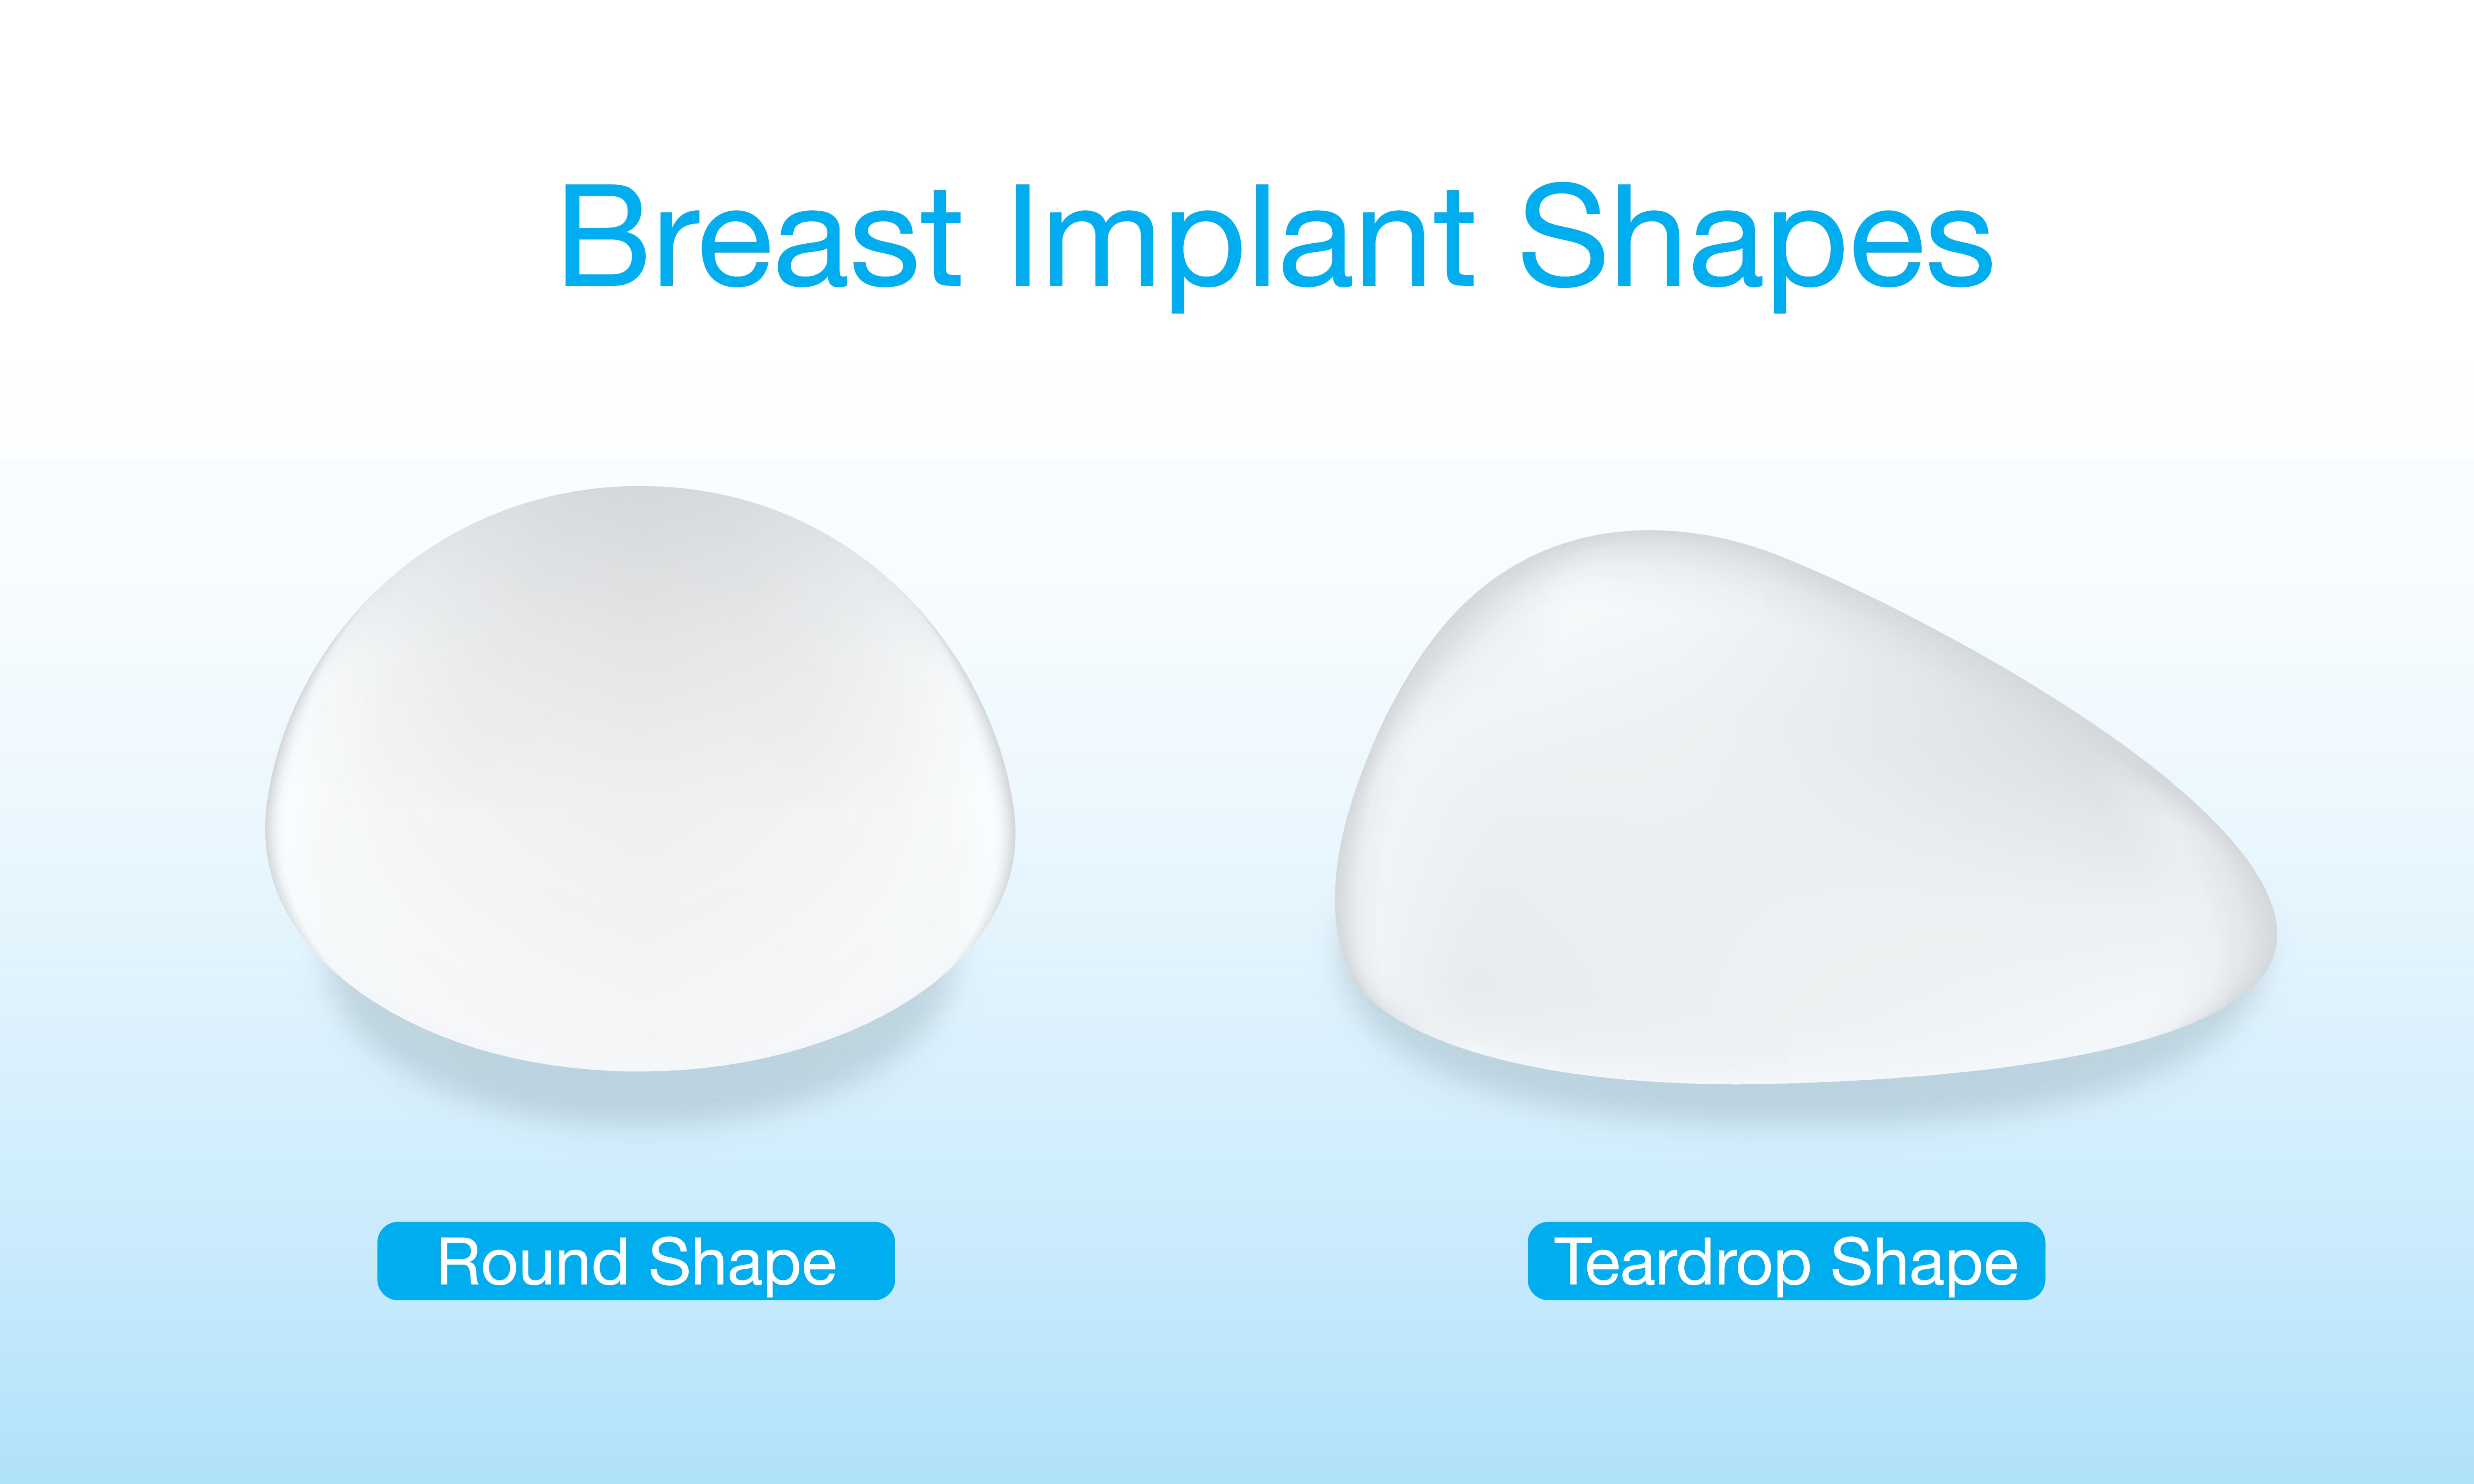 Are High Profile Implants Better Than Low Profile Breast Implants?